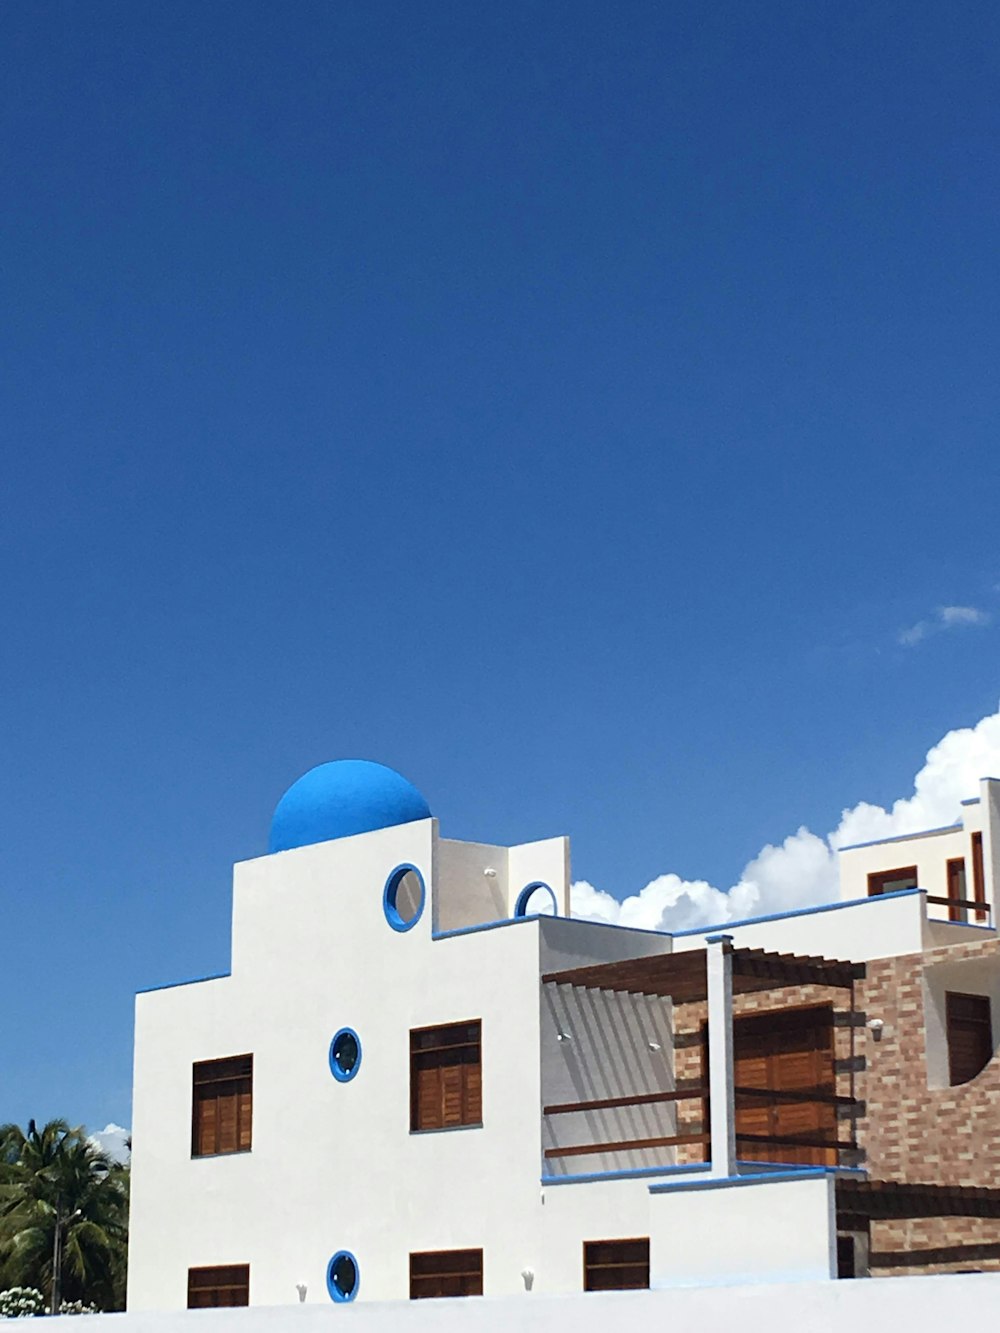 blue and white concrete building under blue sky during daytime